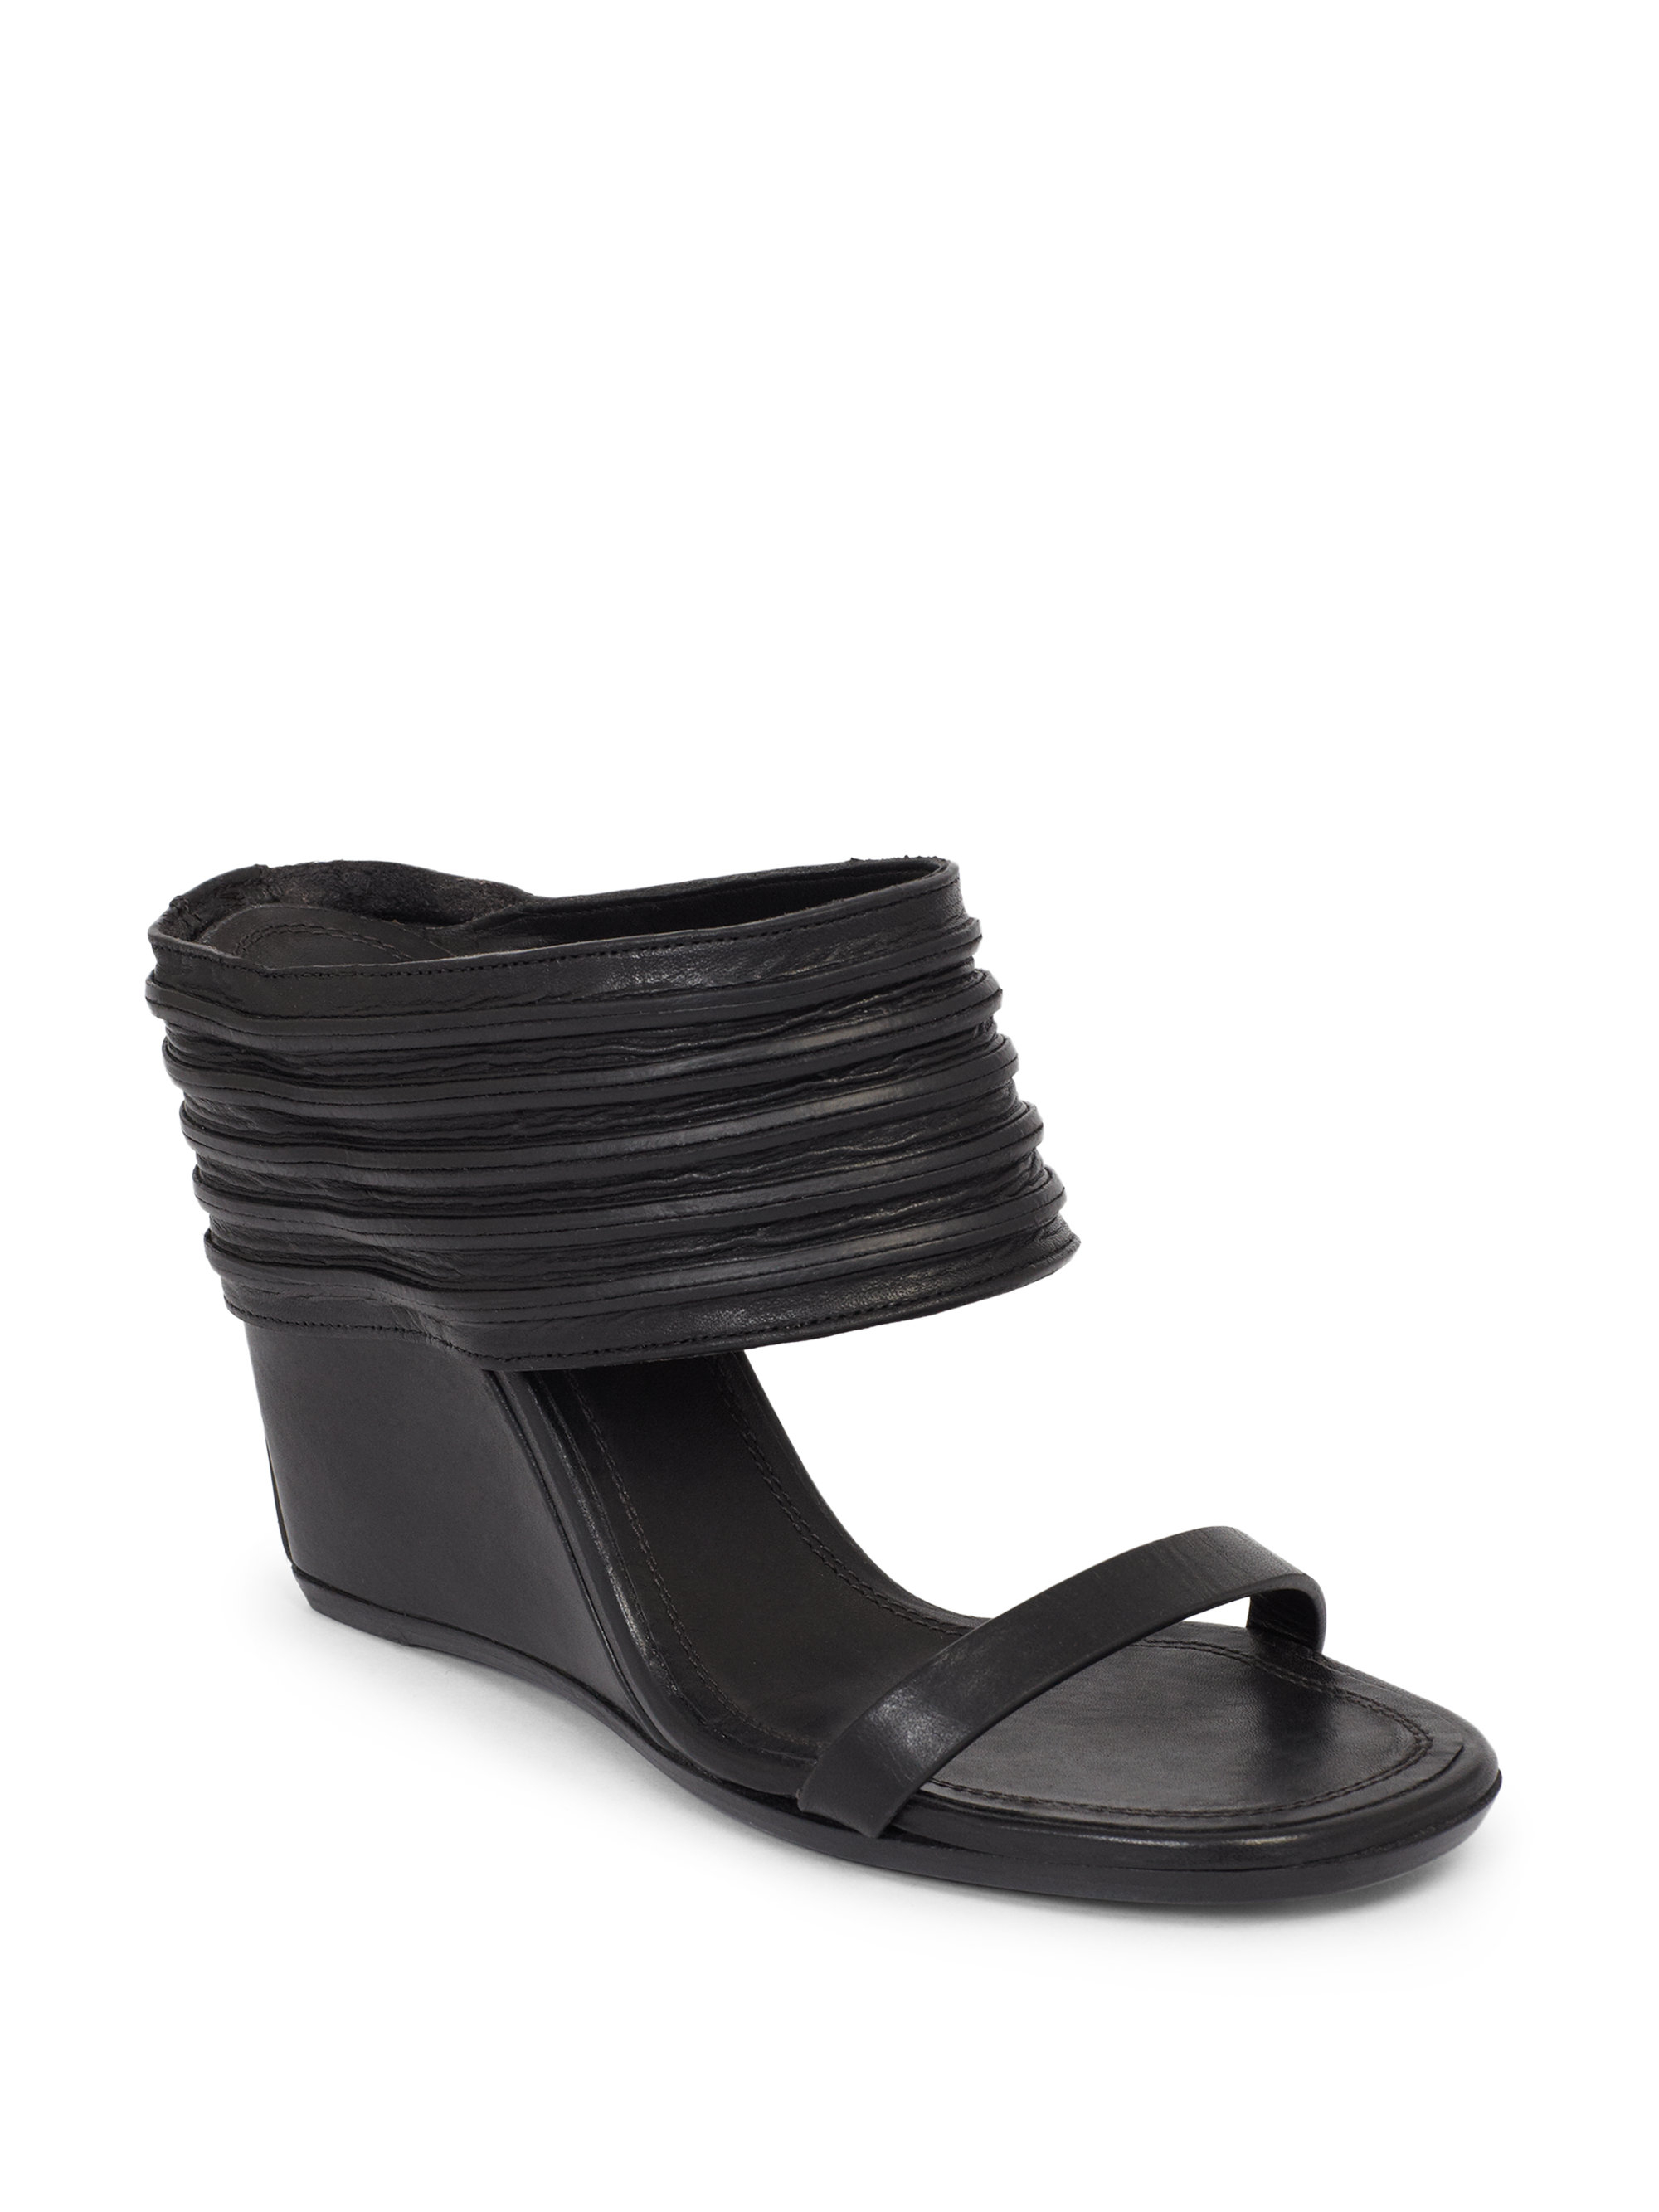 Rick Owens Banded Leather Wedge Sandals in Black | Lyst